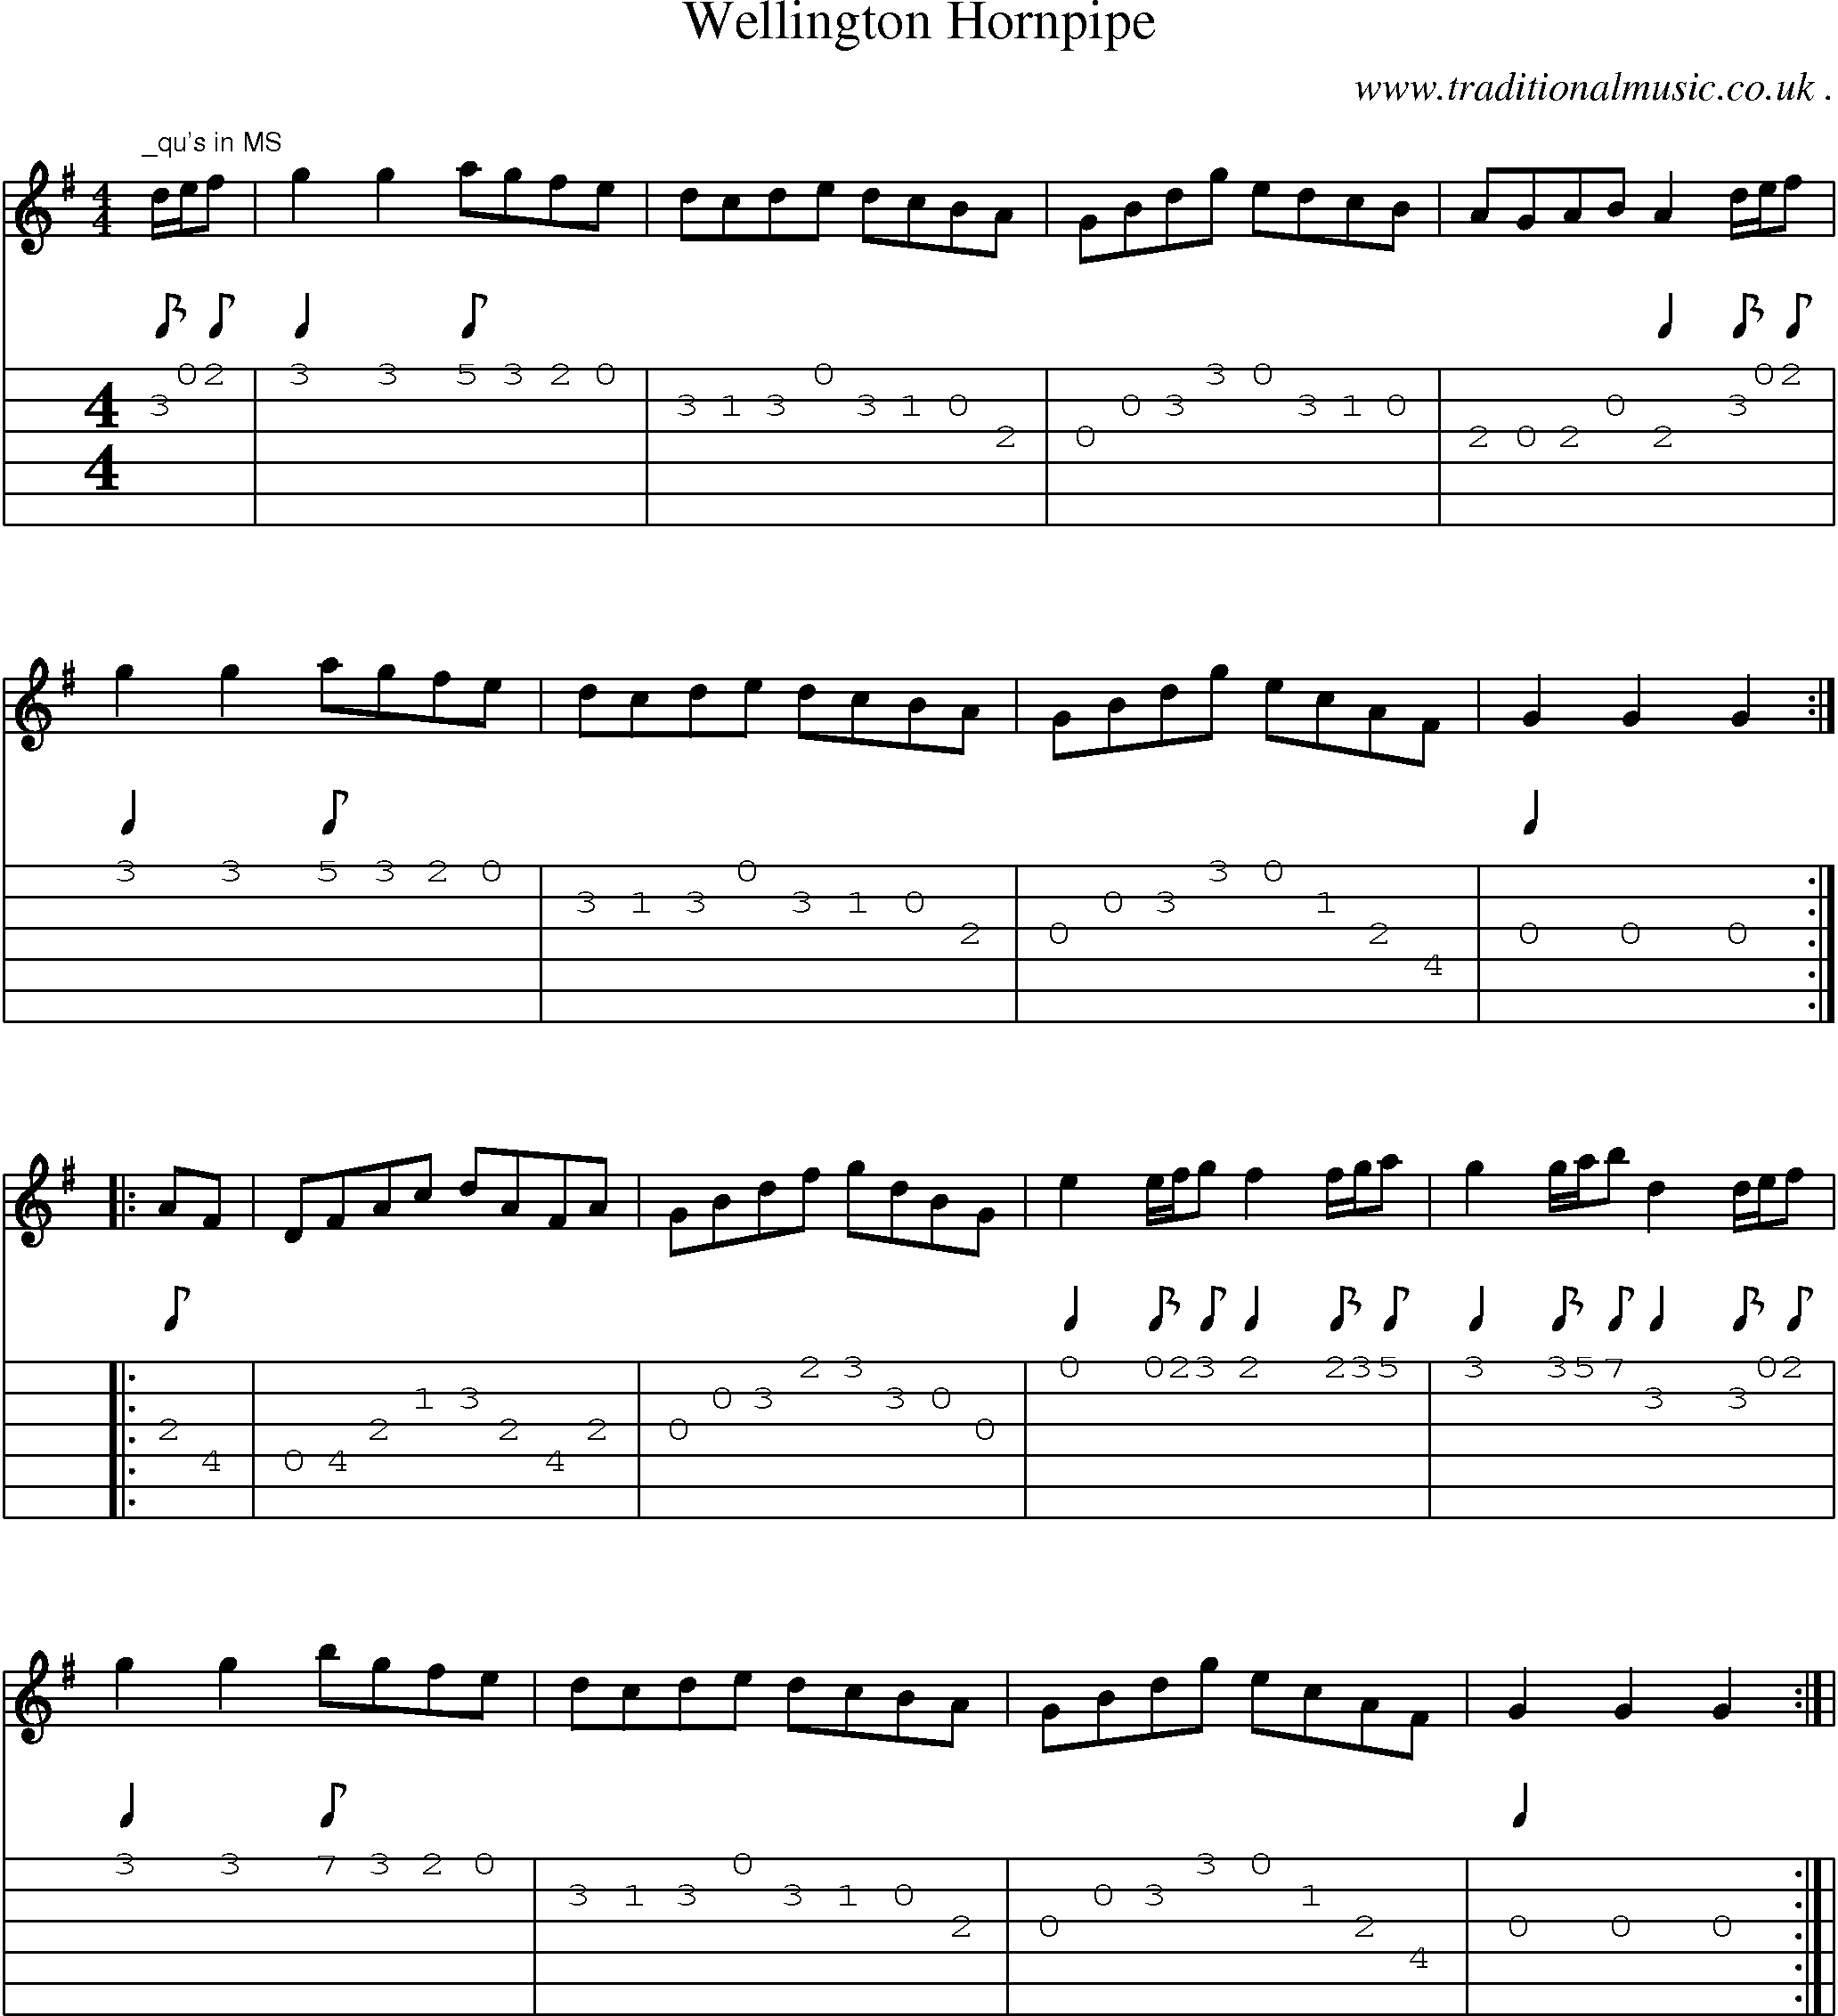 Sheet-Music and Guitar Tabs for Wellington Hornpipe